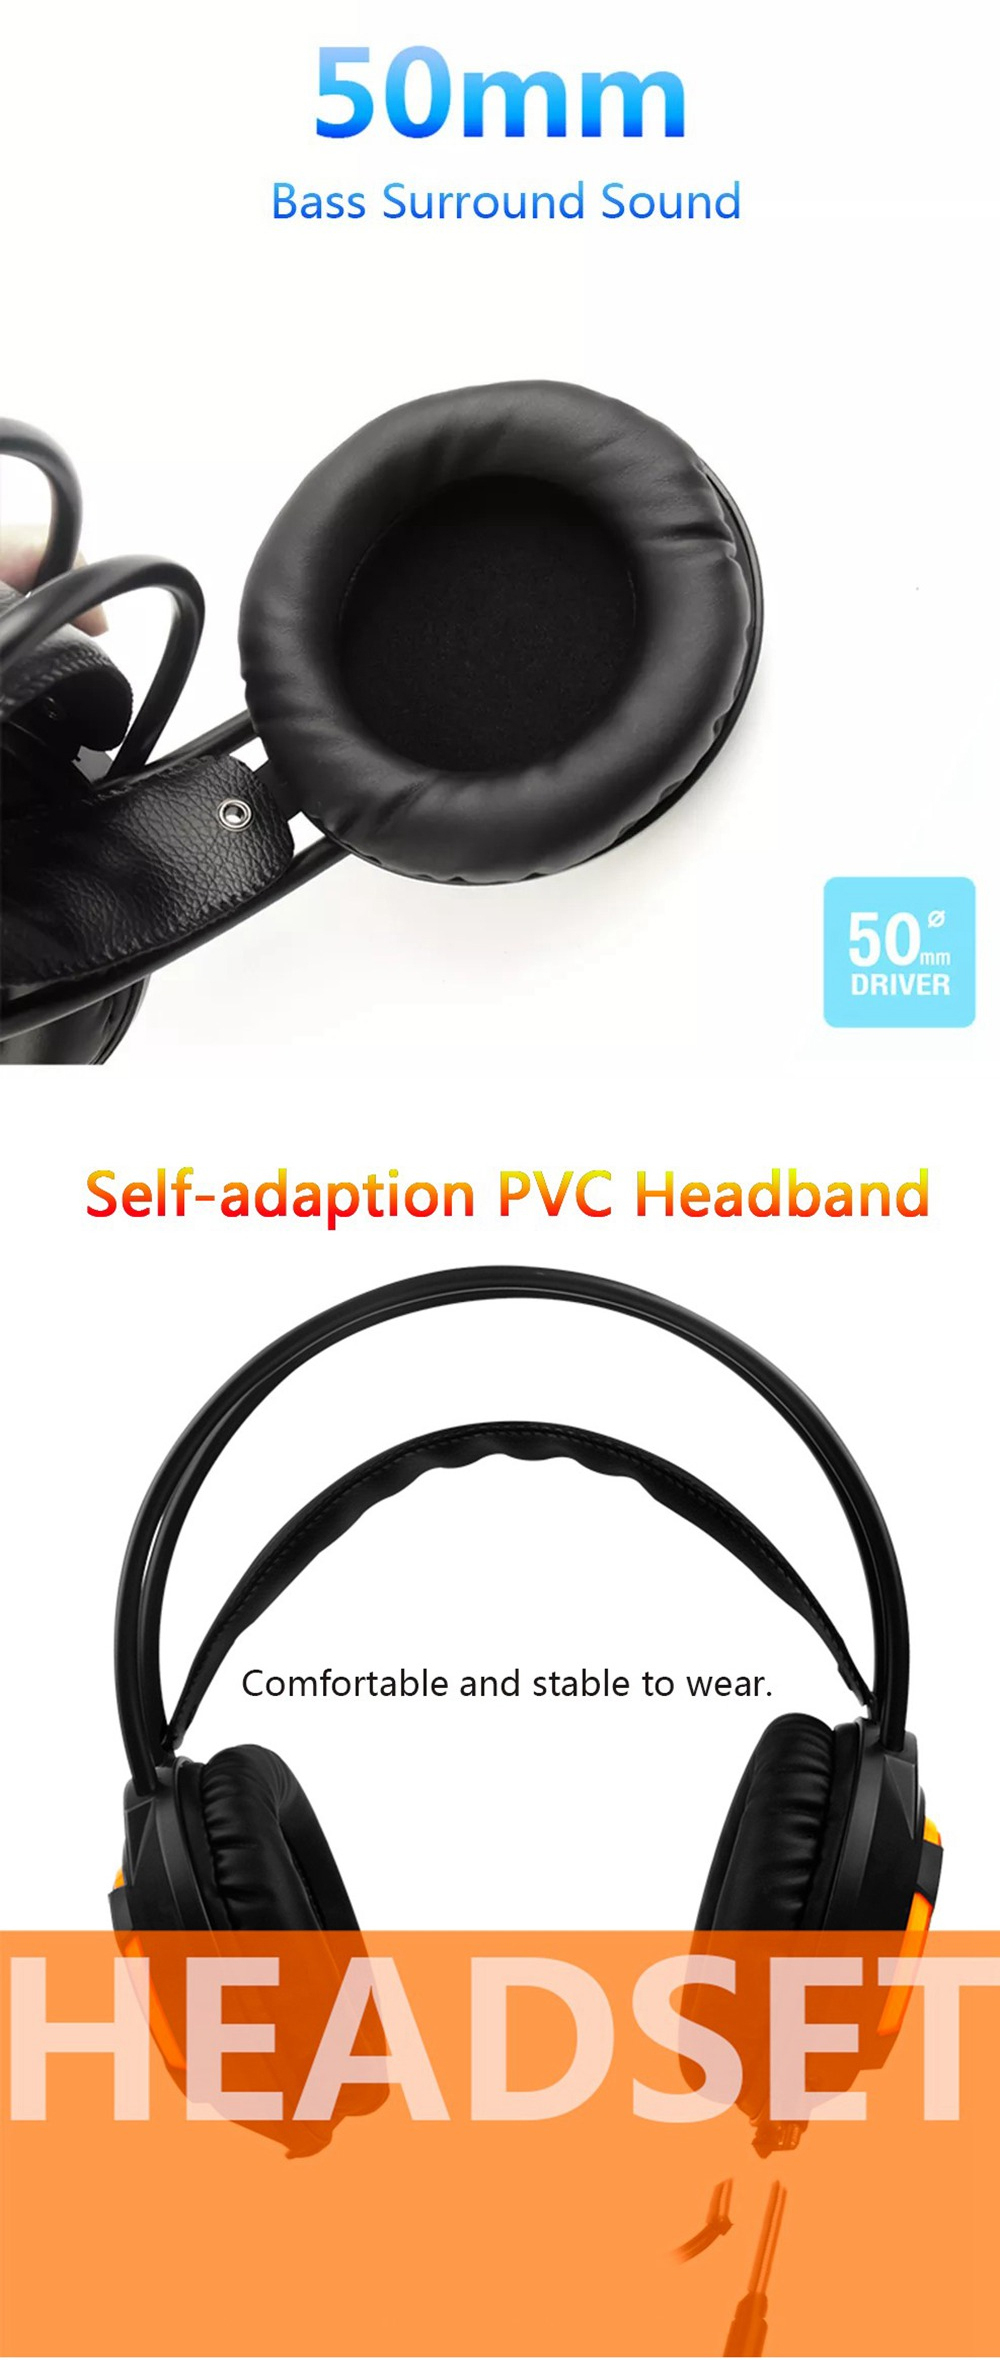 AJAZZ-AX120-Game-Headset-71mm--USB-interface-Bass-Gaming-Stereo-Headphones-Earphone-with-Microphone--1689258-2